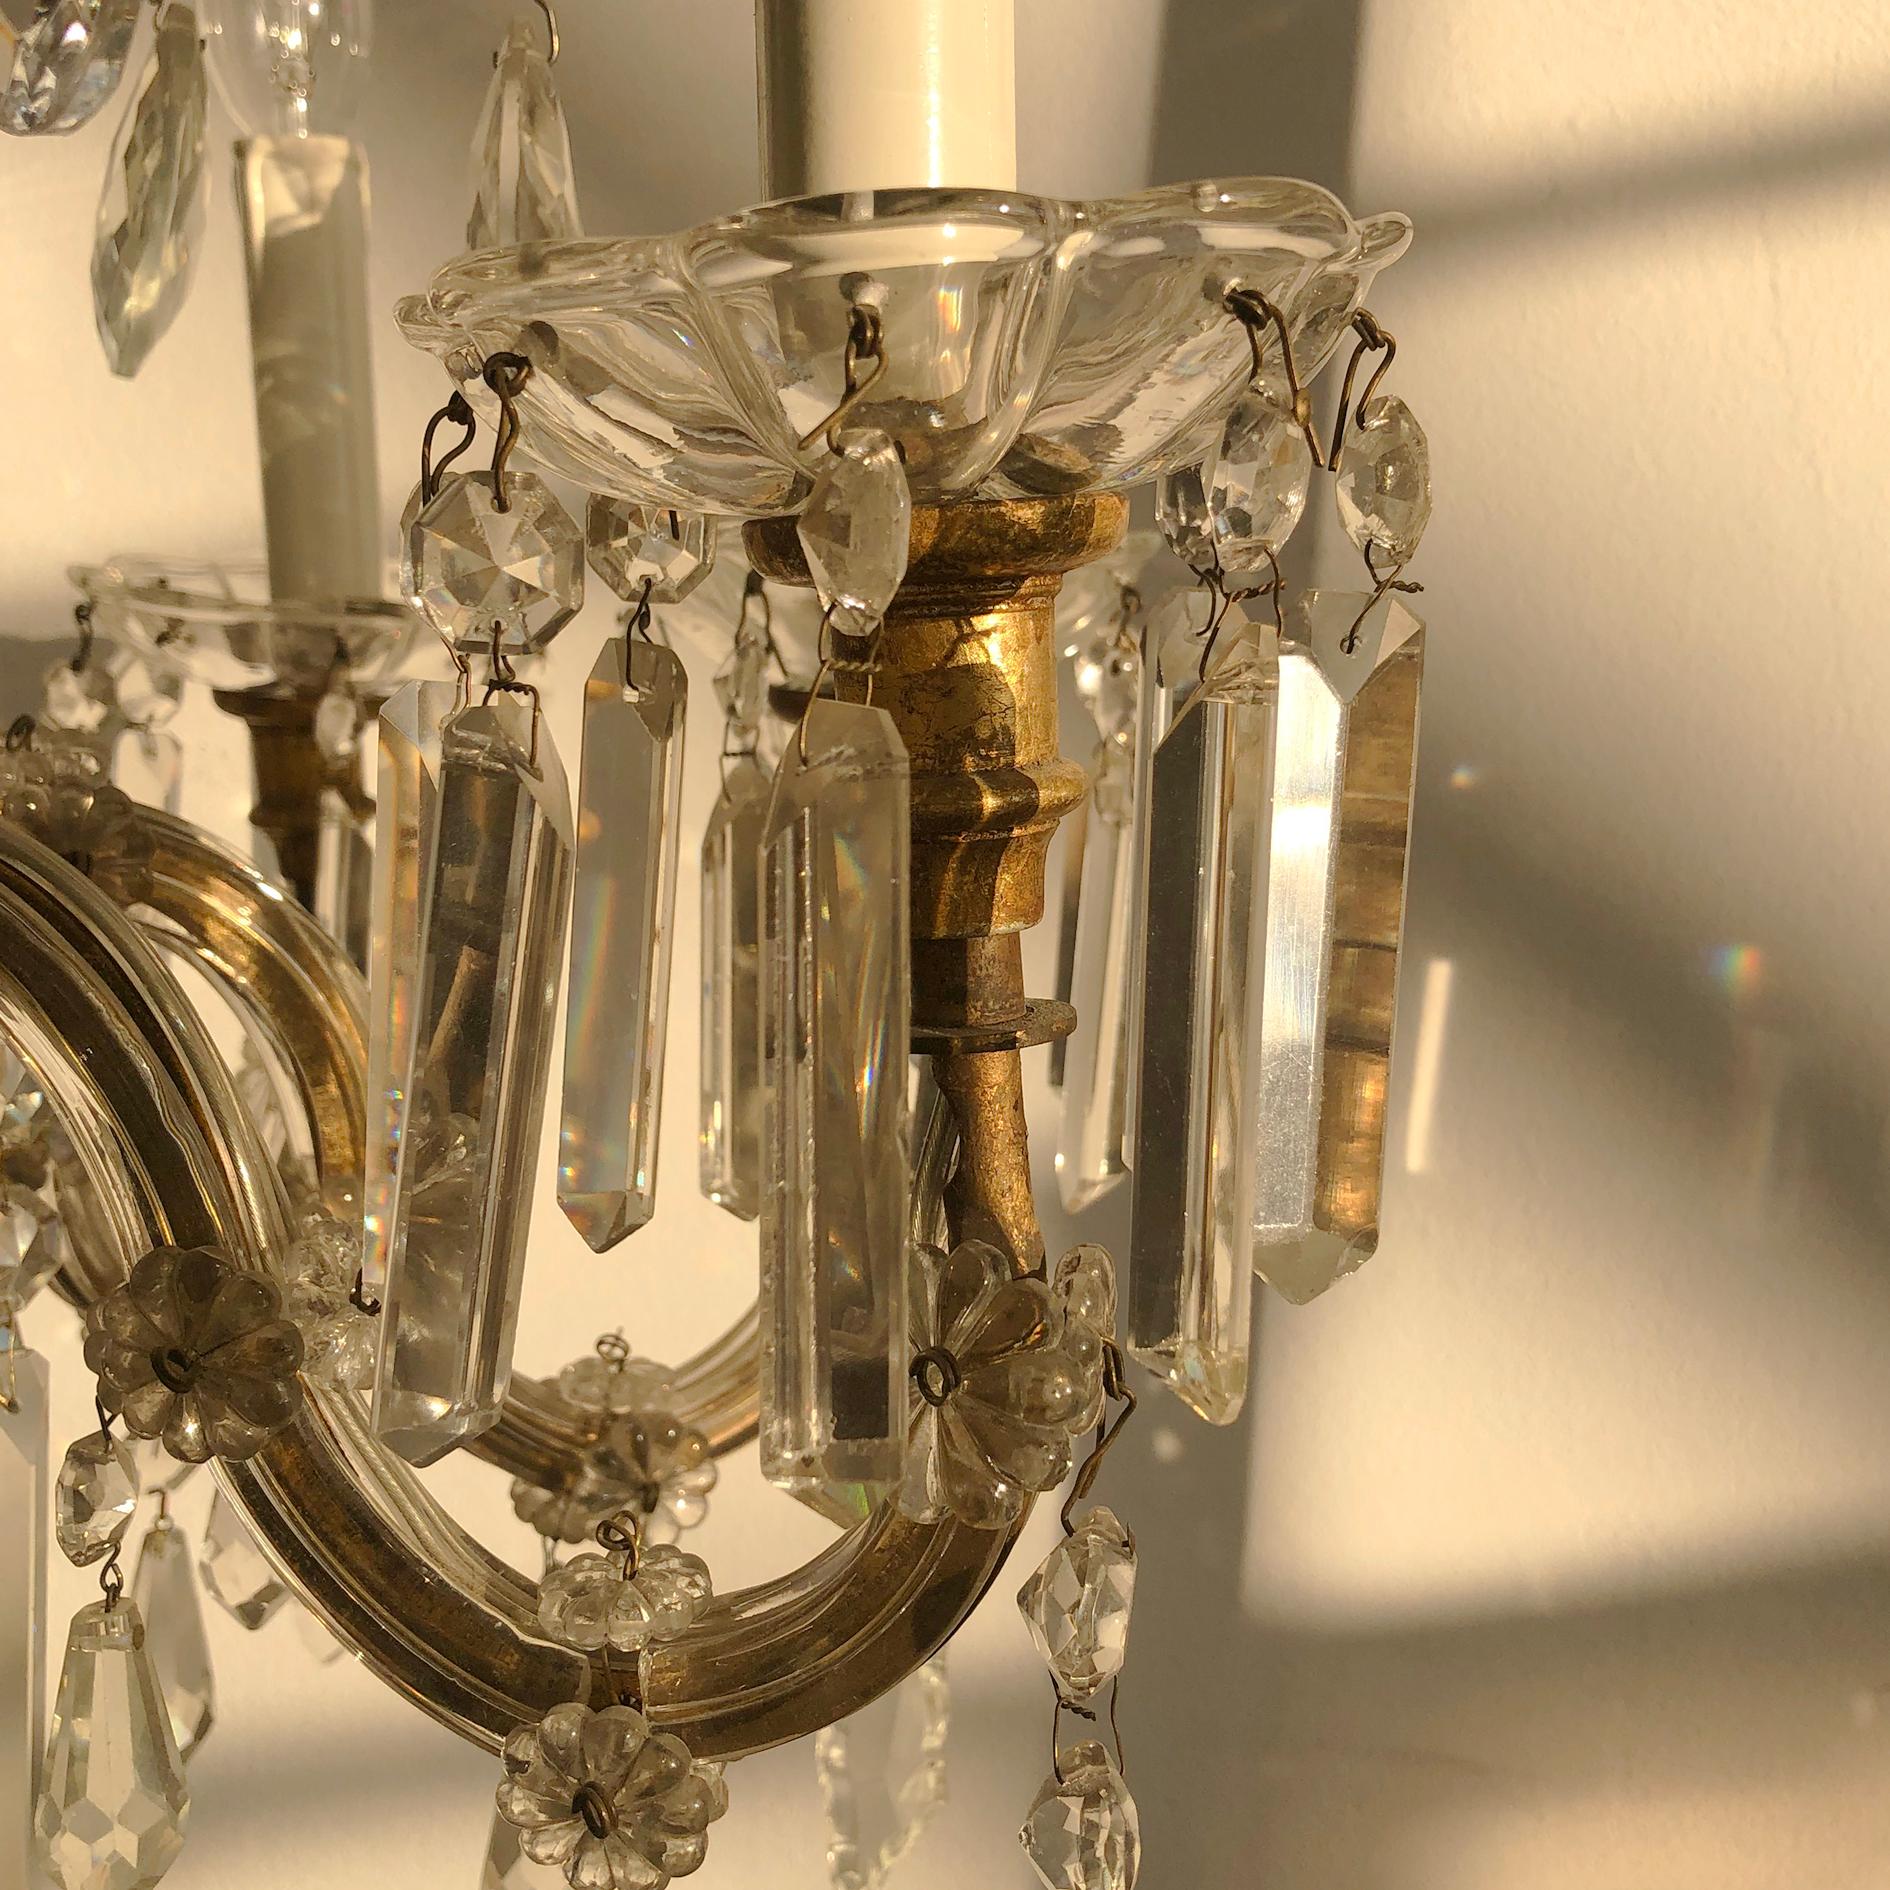 Eight Arm Maria Theresa Crystal Chandelier, Hungary or Austria, 1900s For Sale 1